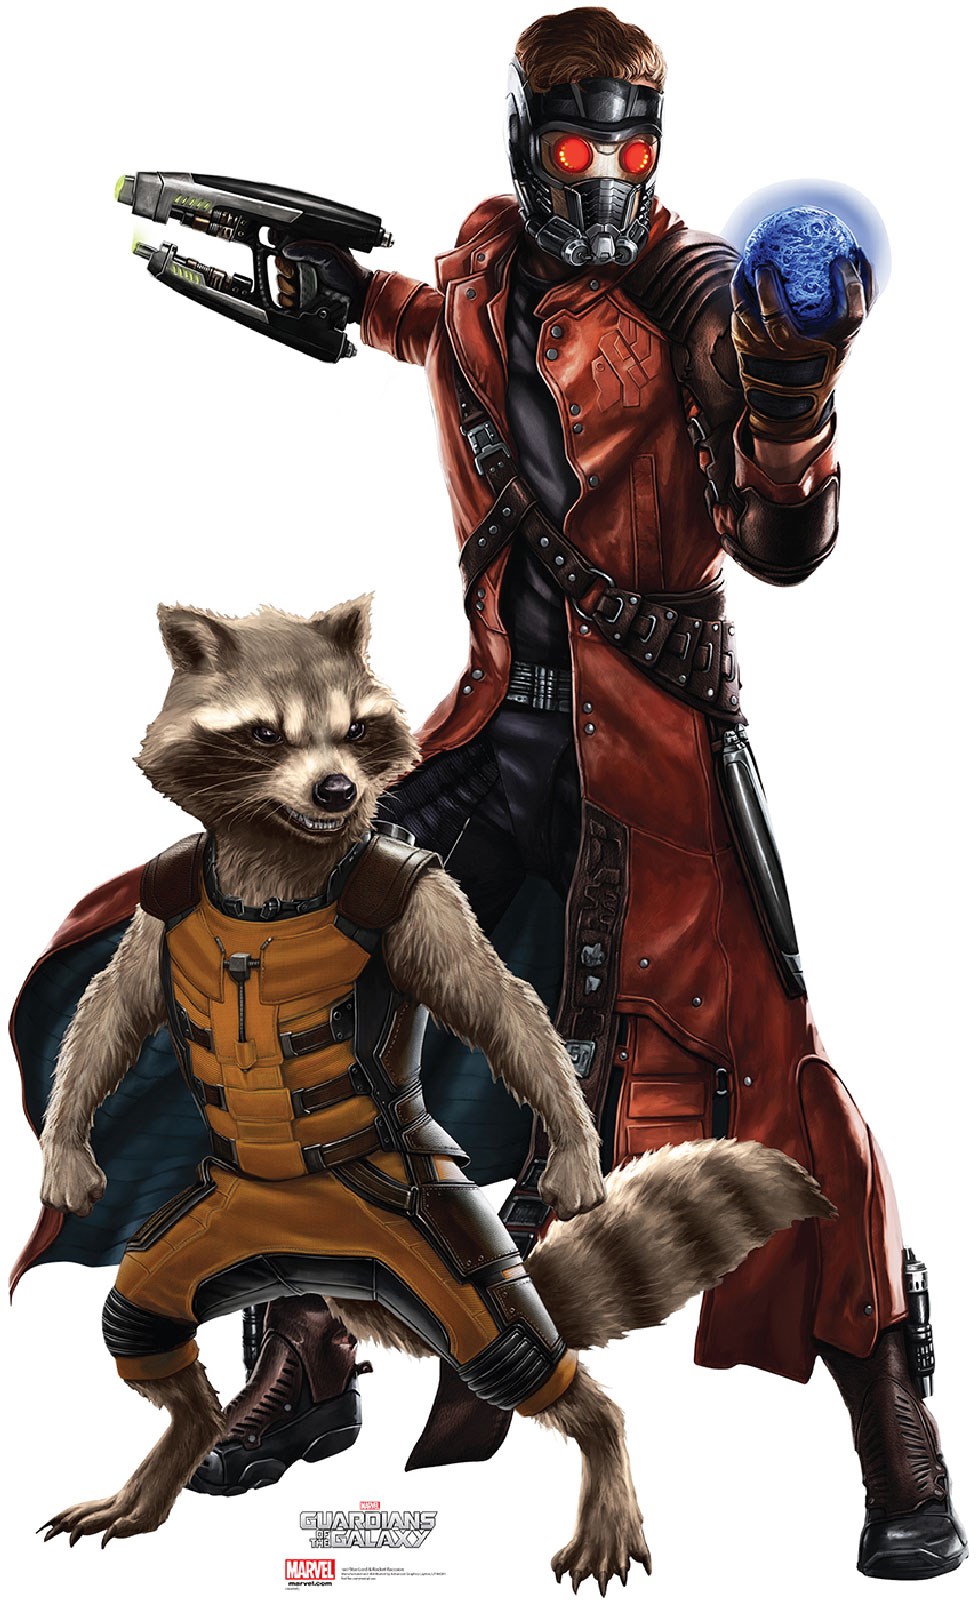 Guardians of the Galaxy - Starlord & Rocket Cardboard Stand Up 6.25